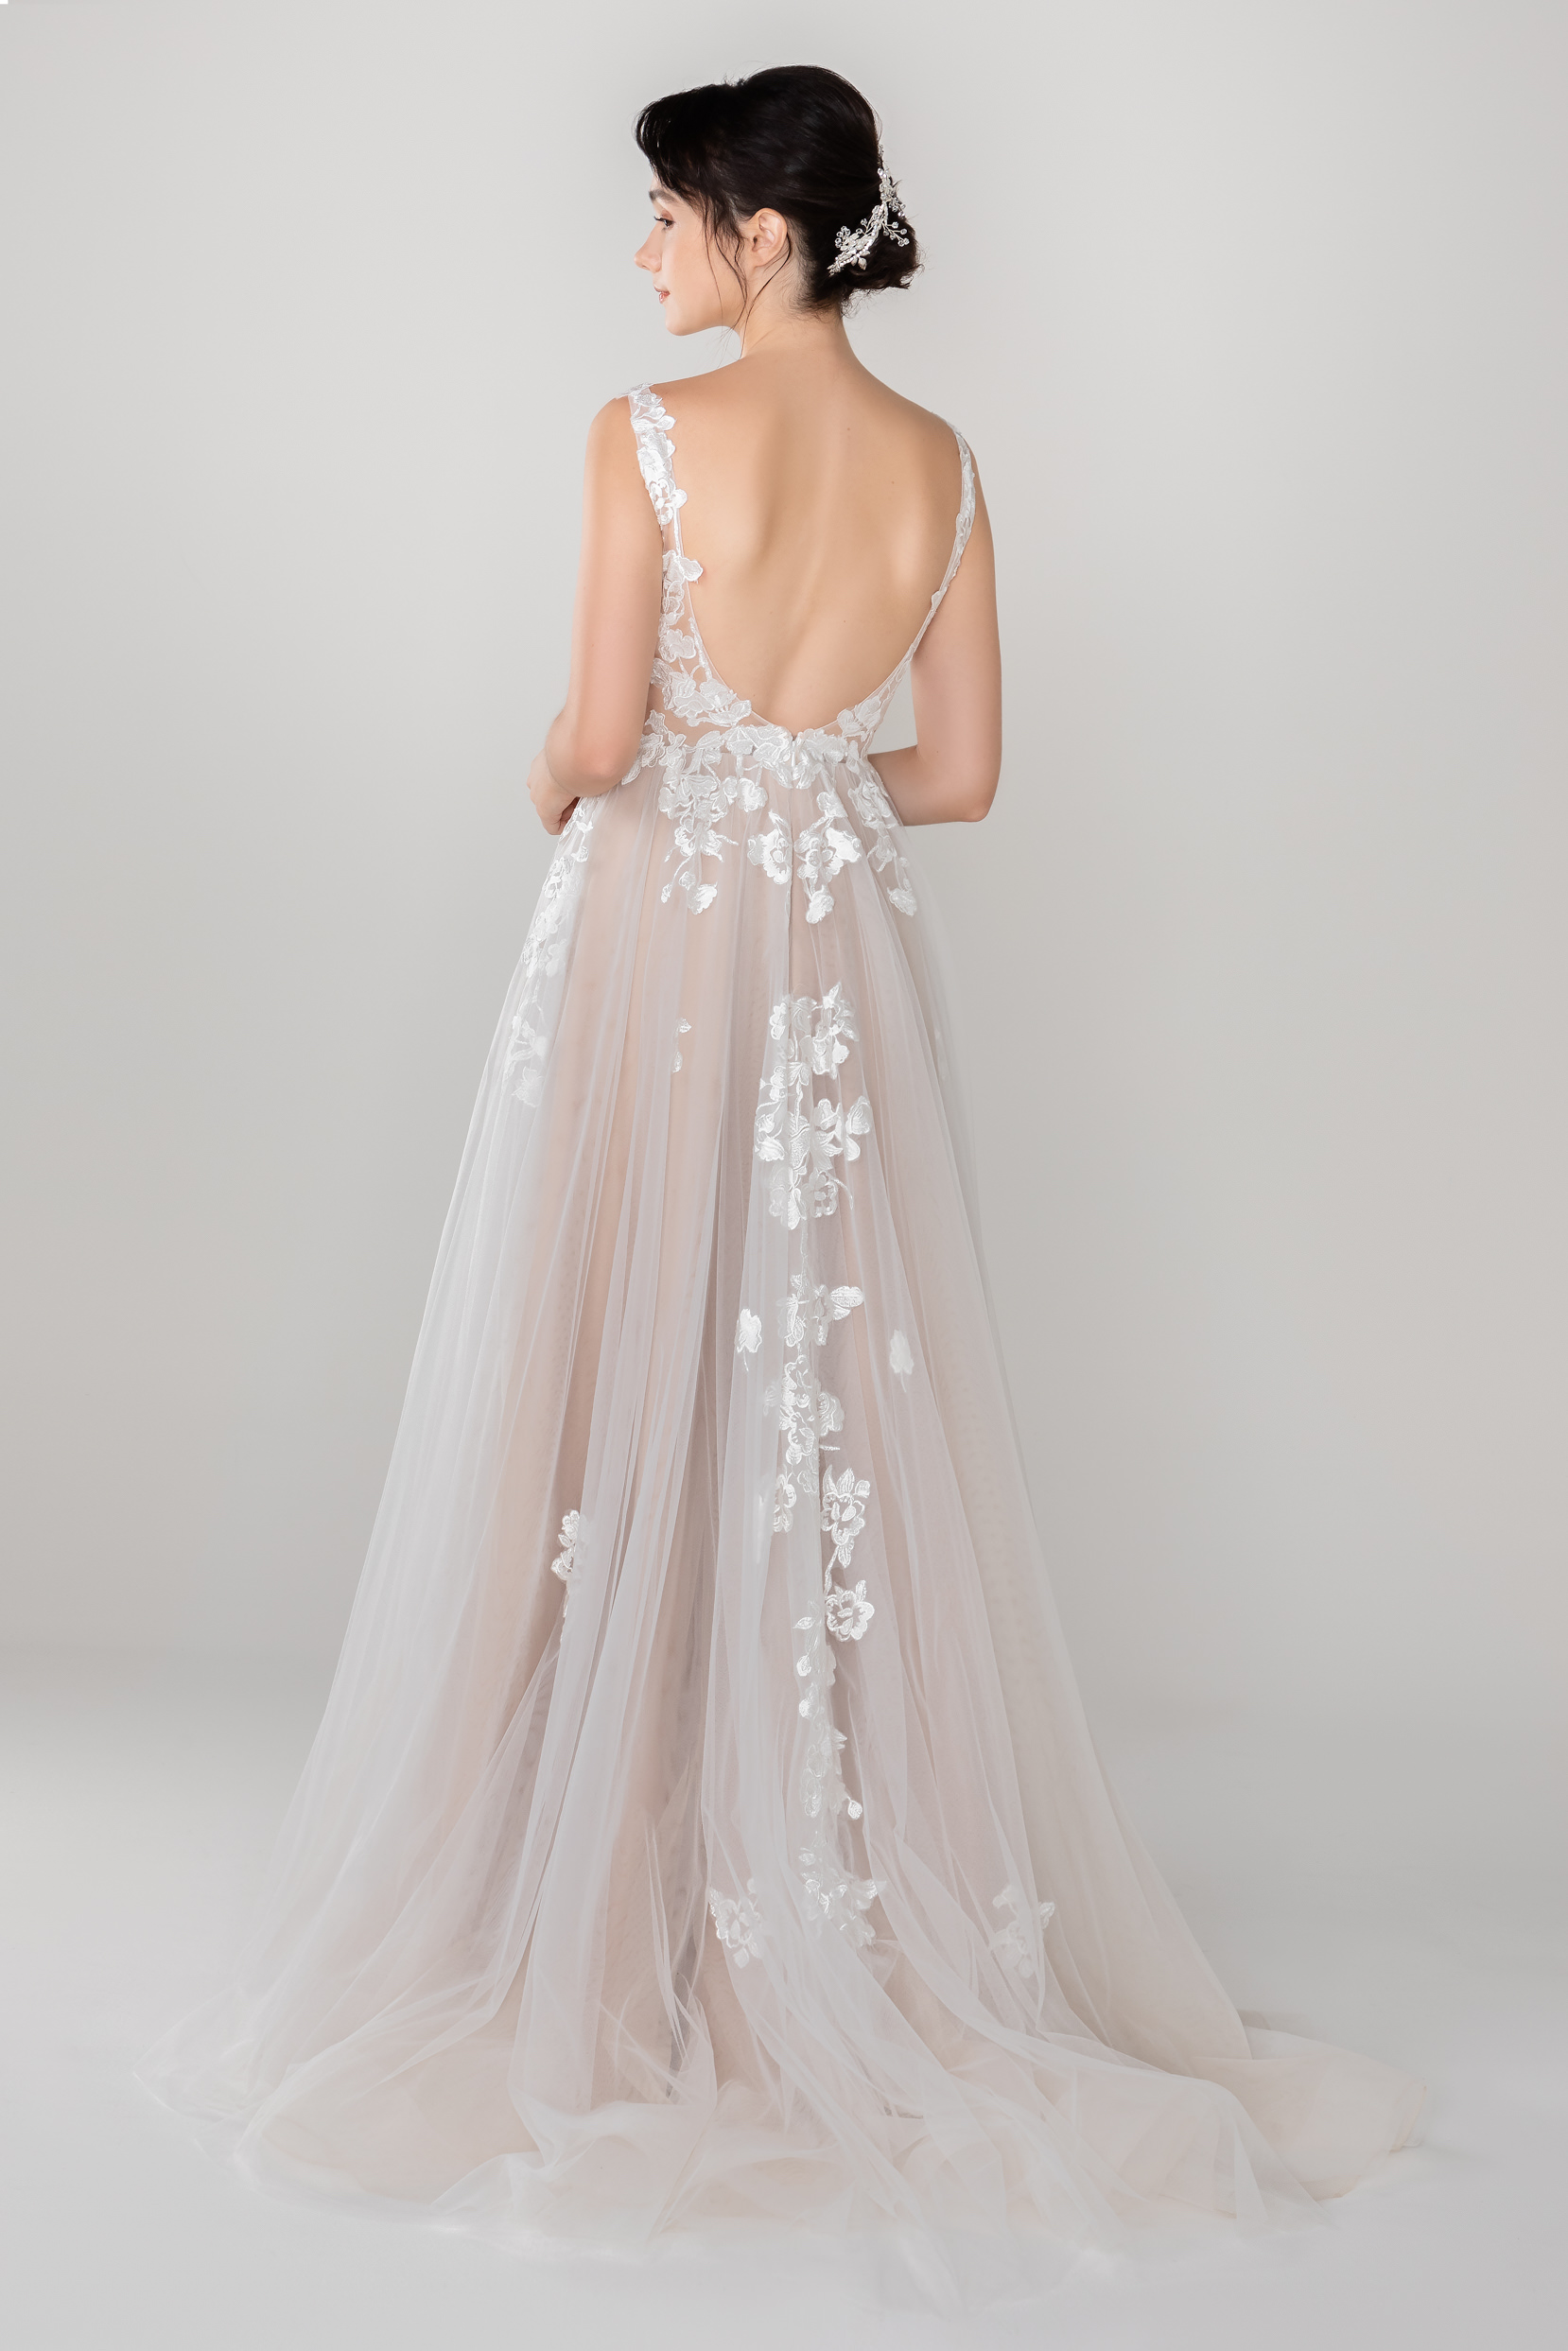 Romantic Wedding Dresses by Cocomelody - CW2534 | ALAYNA